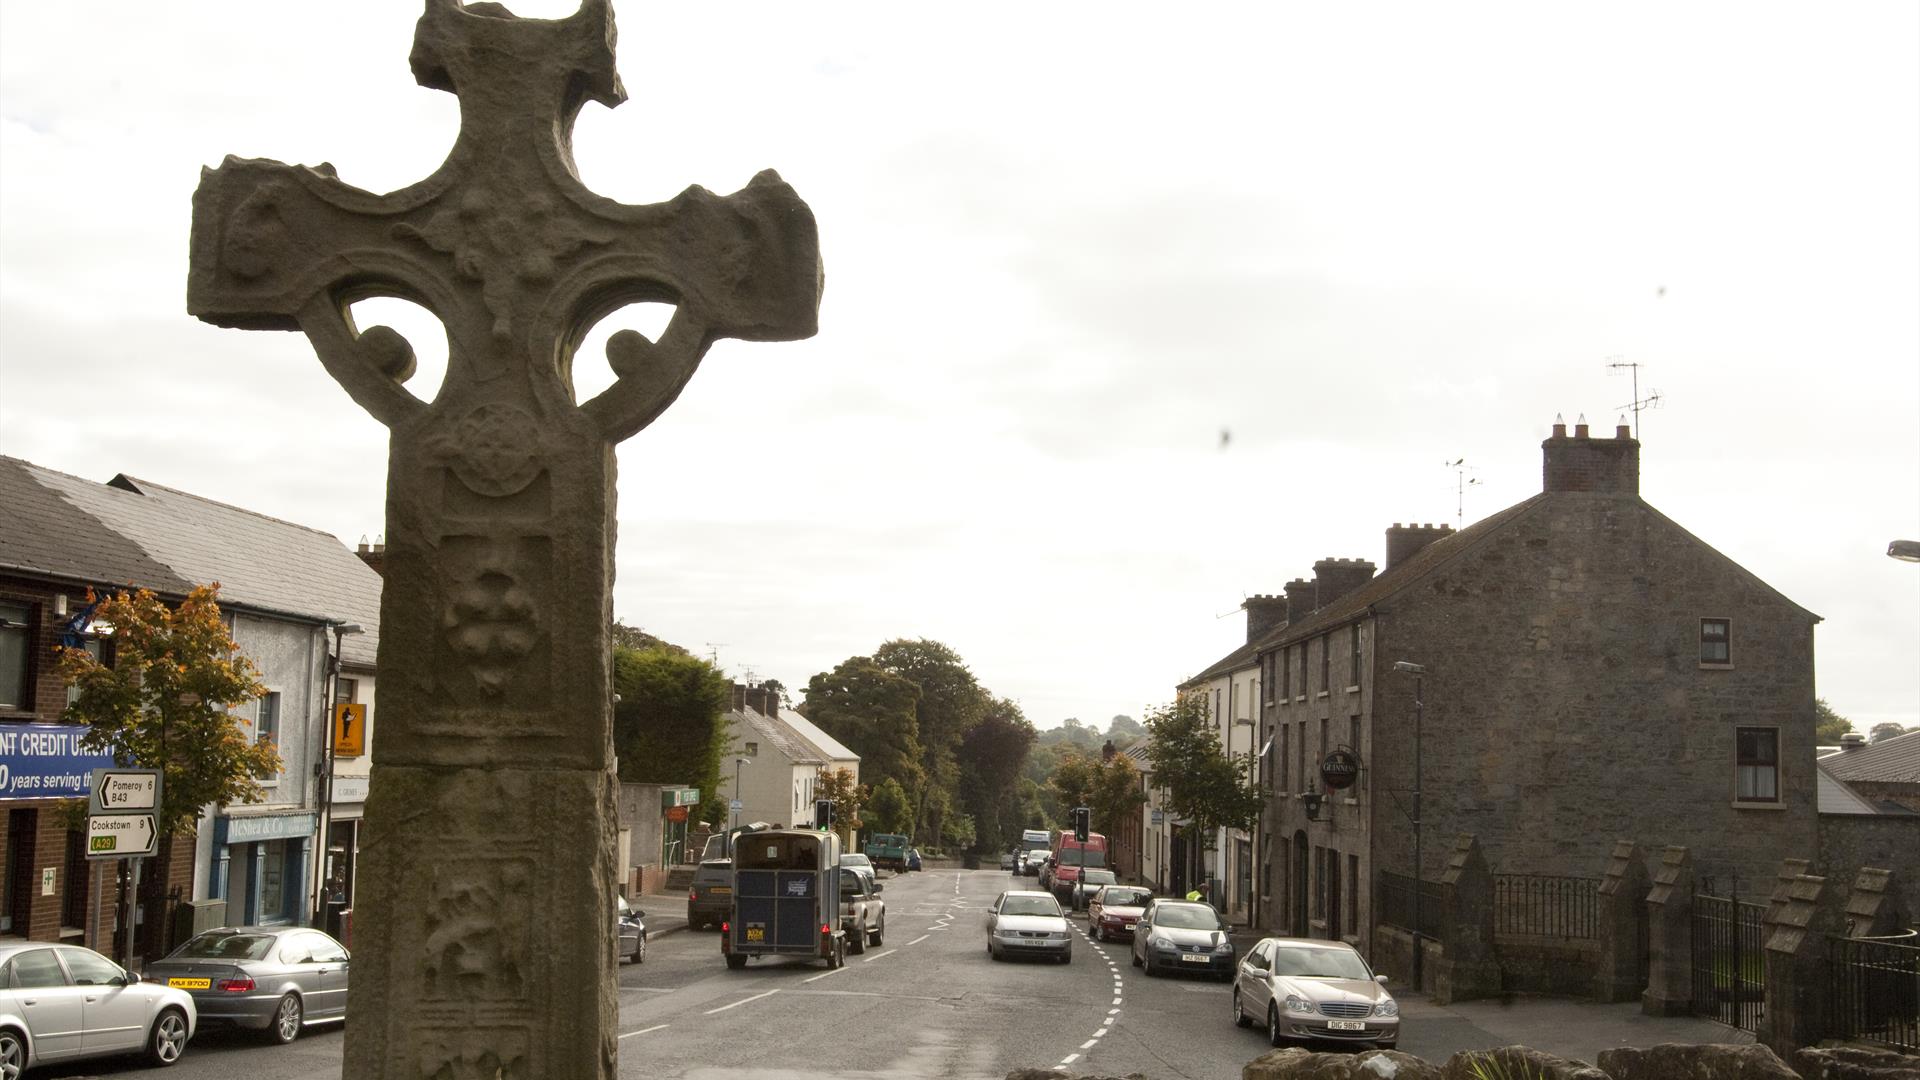 Image of Donaghmore High Cross and the town